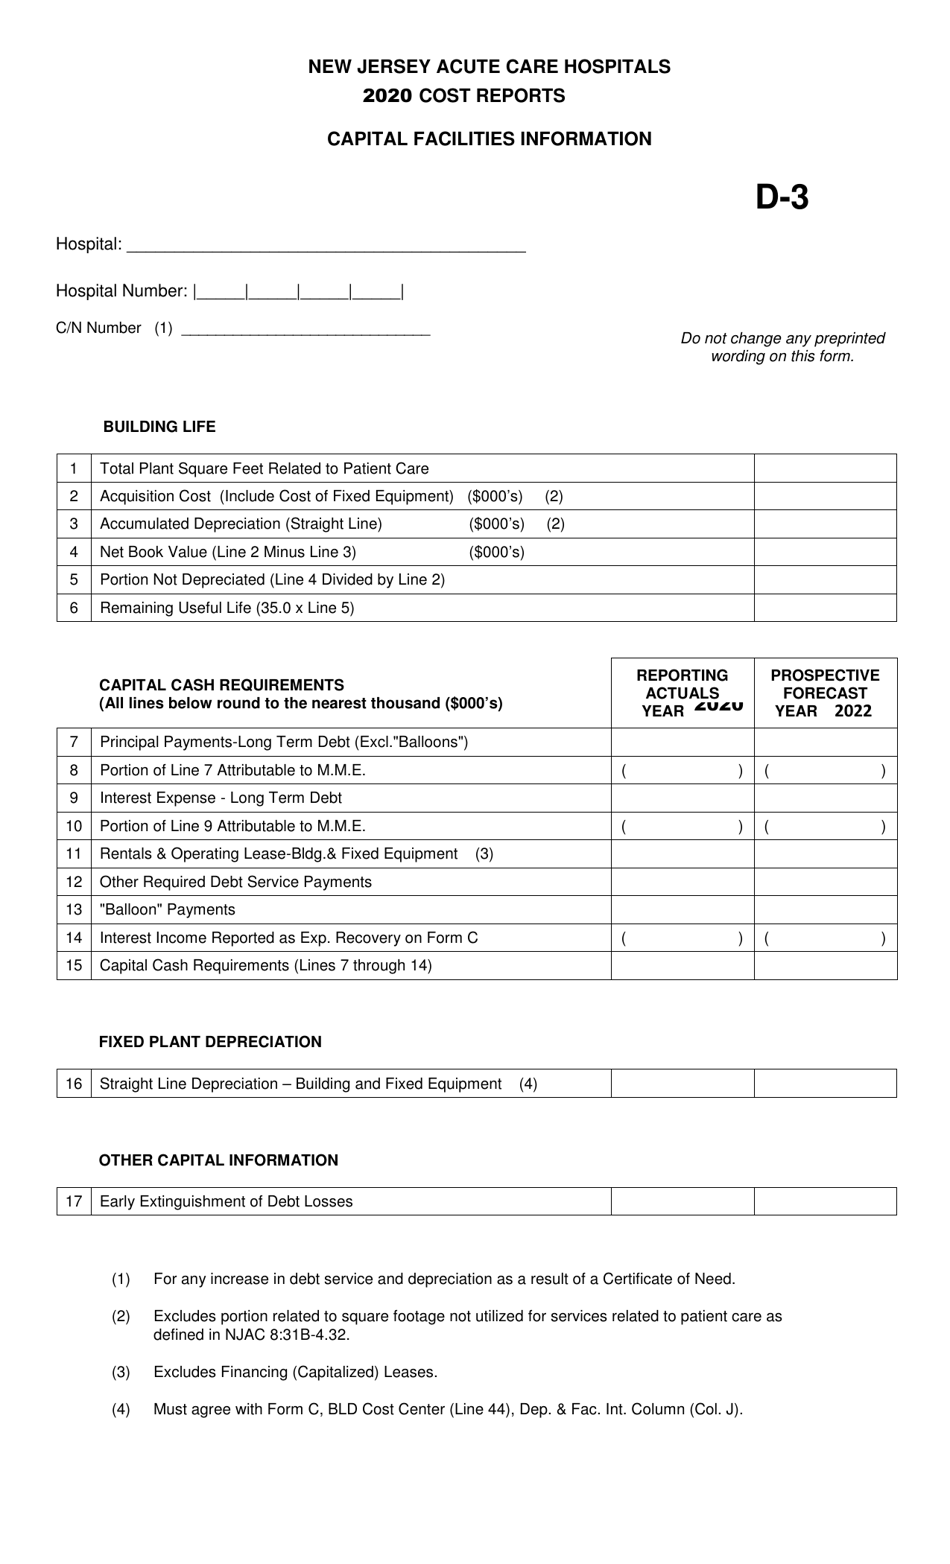 Form D-3 New Jersey Acute Care Hospitals Cost Reports - Capital Facilities Information - New Jersey, Page 1